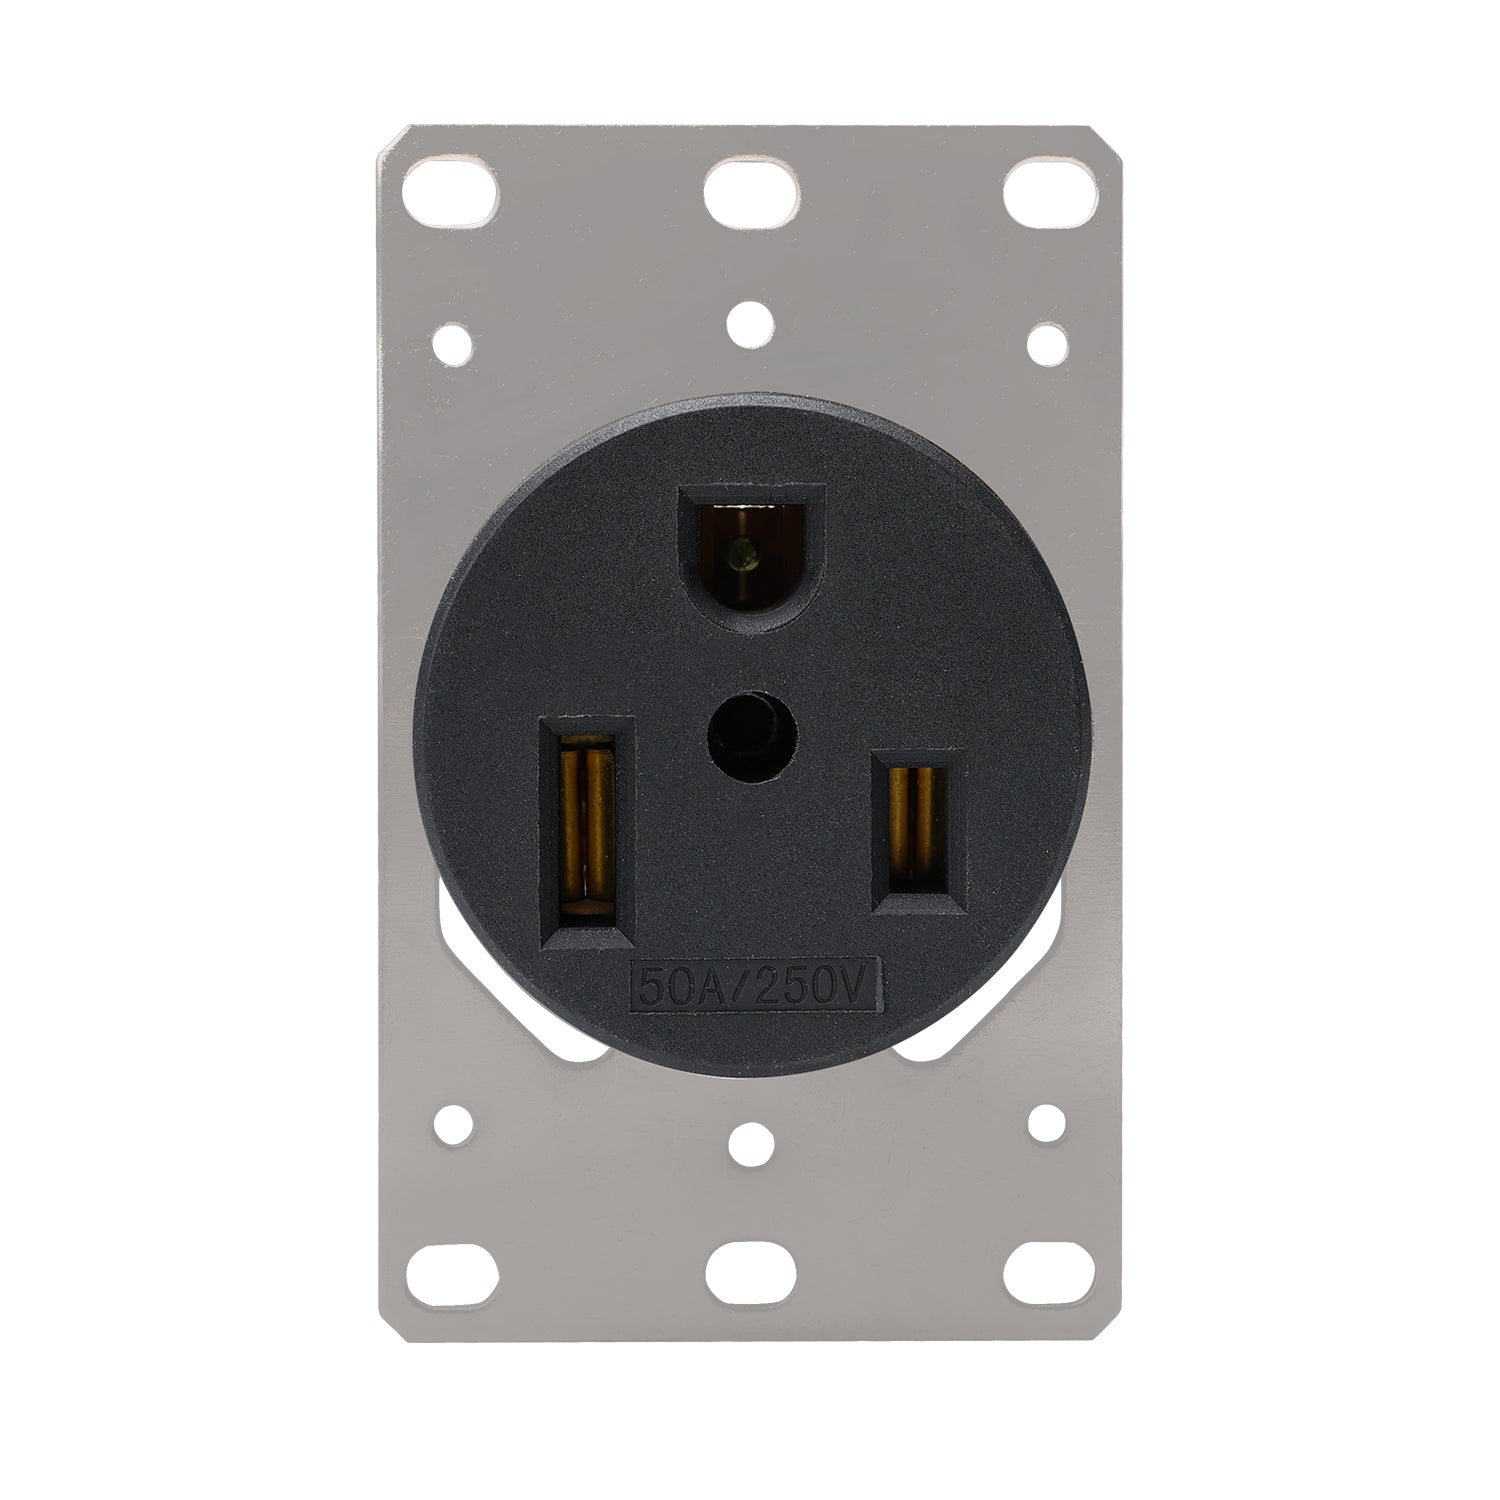 STARELO Flush Mounting Receptacle NEMA 6-50R, 50A 250V 2 Pole 3 Wire Grounding Straight Blade, Heavy Duty Industrial Grade Power Receptacle (6-50R)